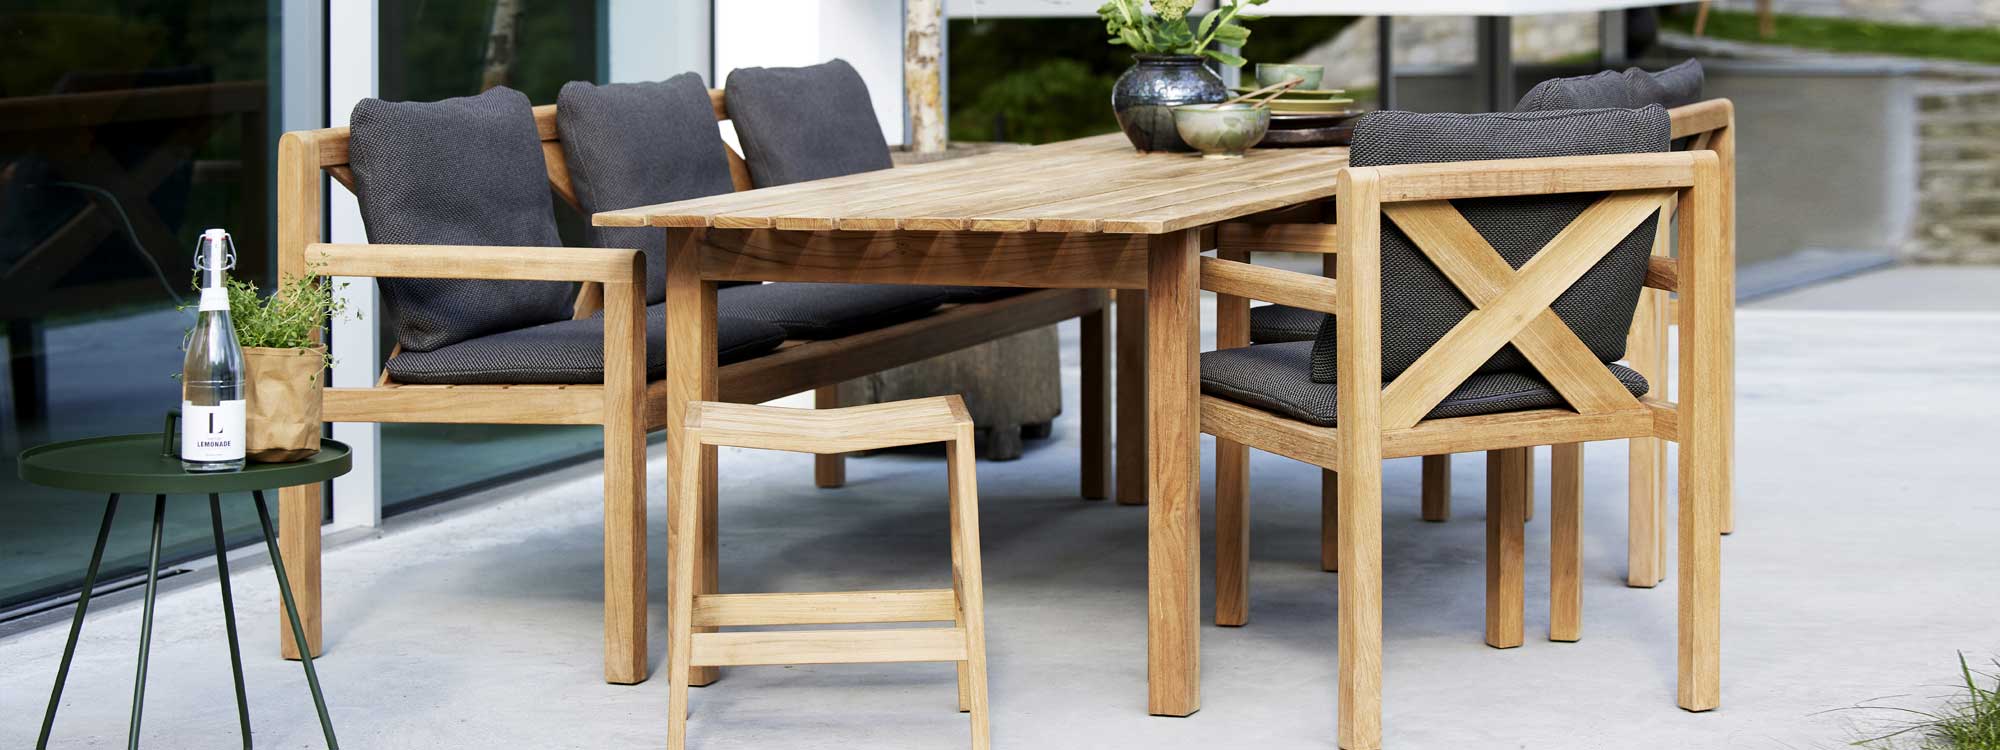 Image of Flip teak stool and Grace teak table, bench and chairs by Cane-line garden furniture